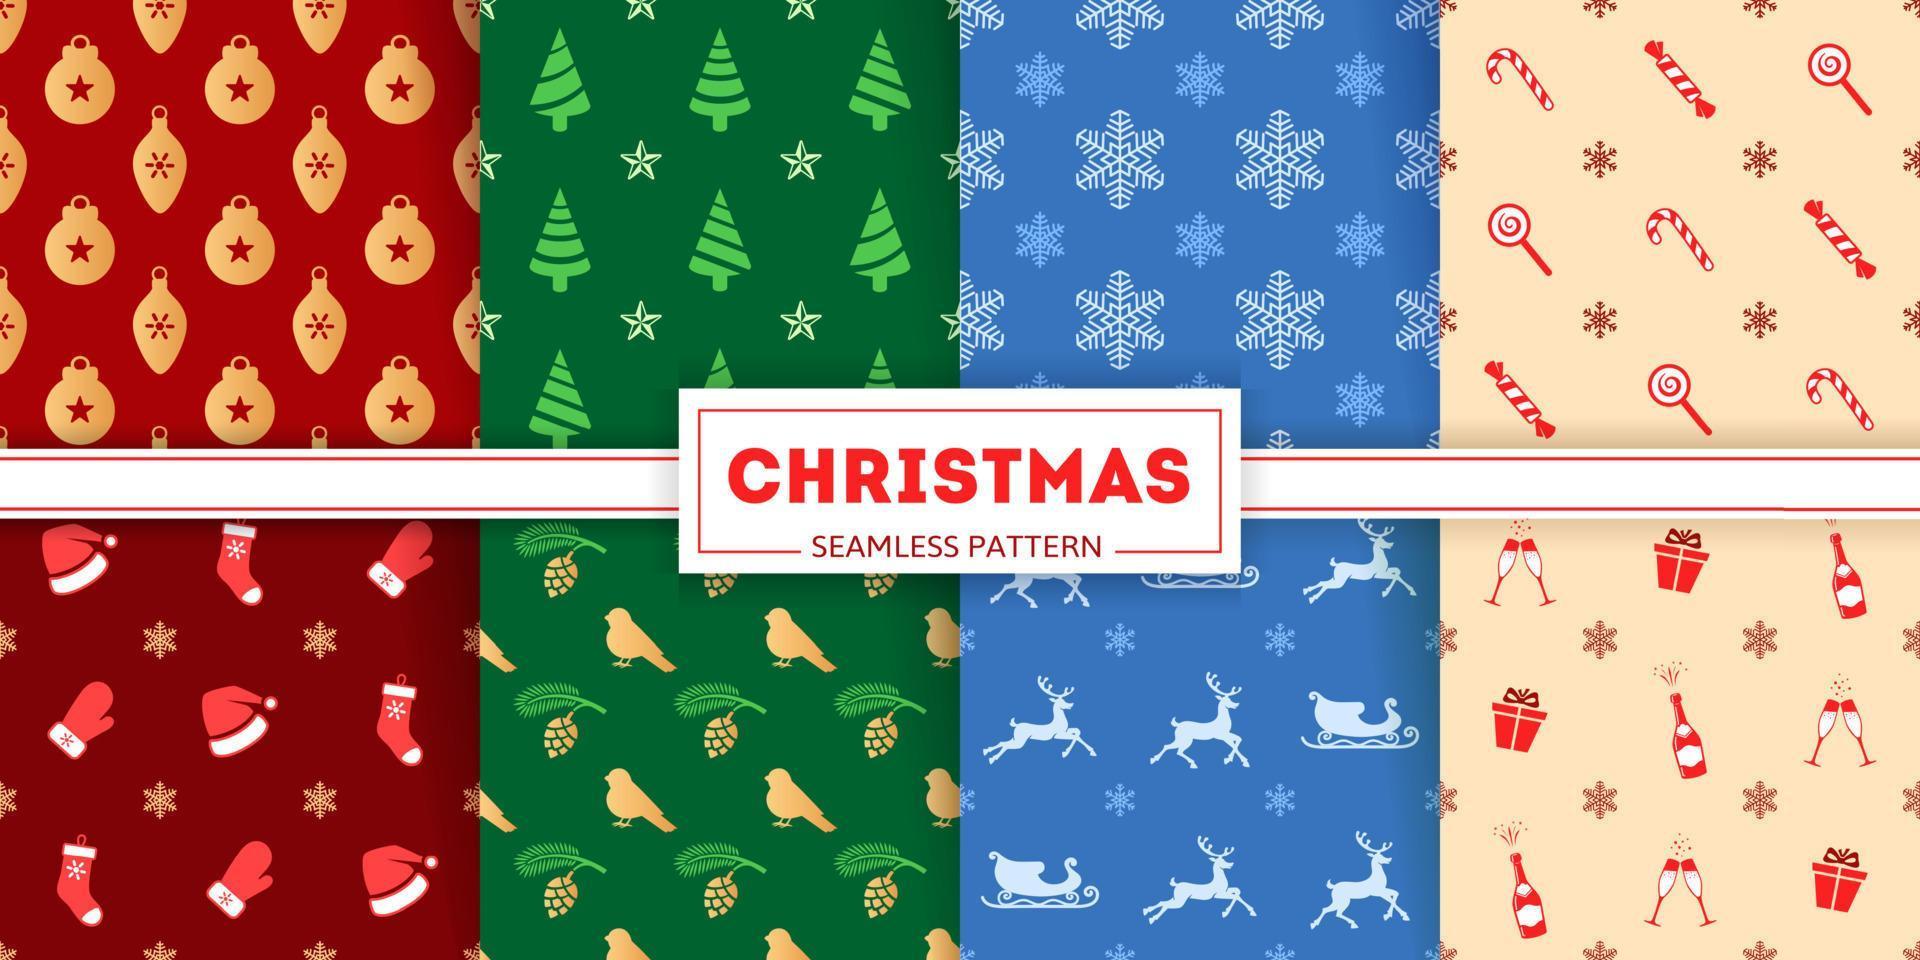 Christmas seamless patterns collection. Icons and silhouettes of Christmas balls, Christmas trees, snowflakes and candies. Colorful Illustrations of stocking, gift boxes and deers. Christmas textures vector